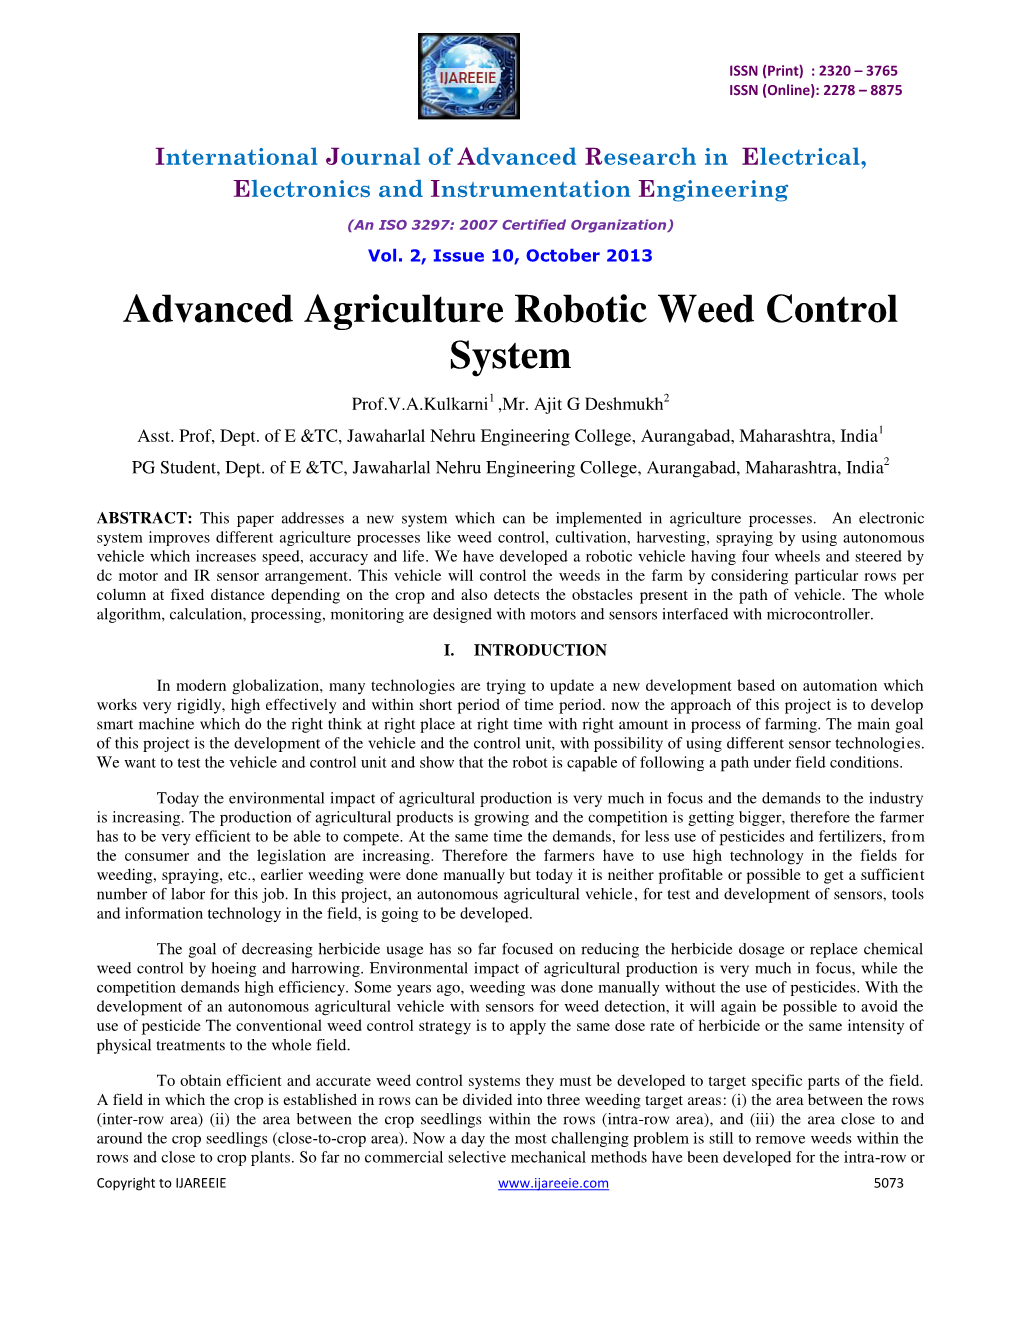 Advanced Agriculture Robotic Weed Control System